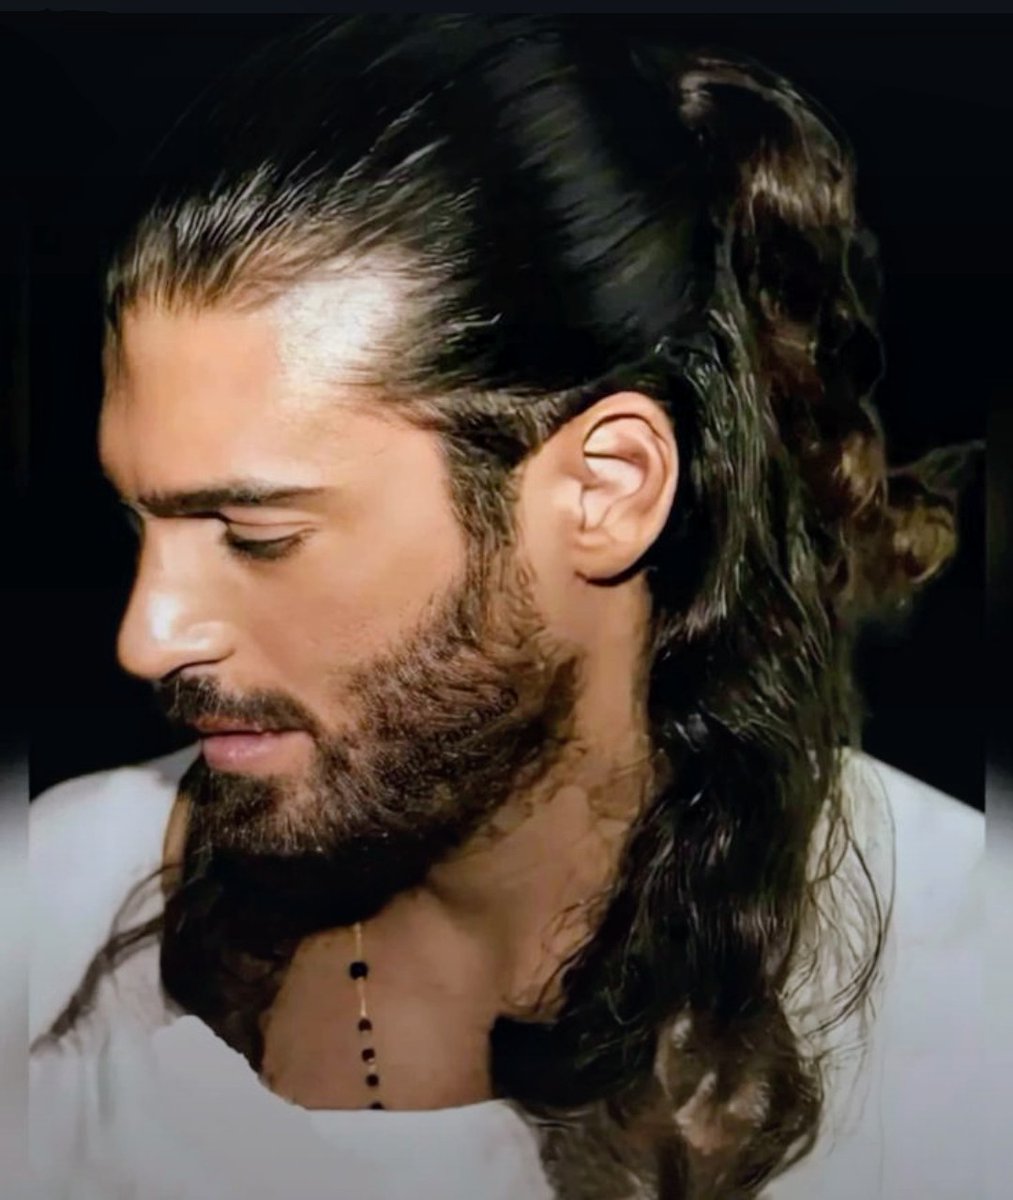 #100faces2024canyamanI vote for #CanYaman from Turkey for the most beautiful face of 2024 @tccandler #100face2024 #TCCandler #100mostbeautifulfaces2024
#100faces2024canyaman